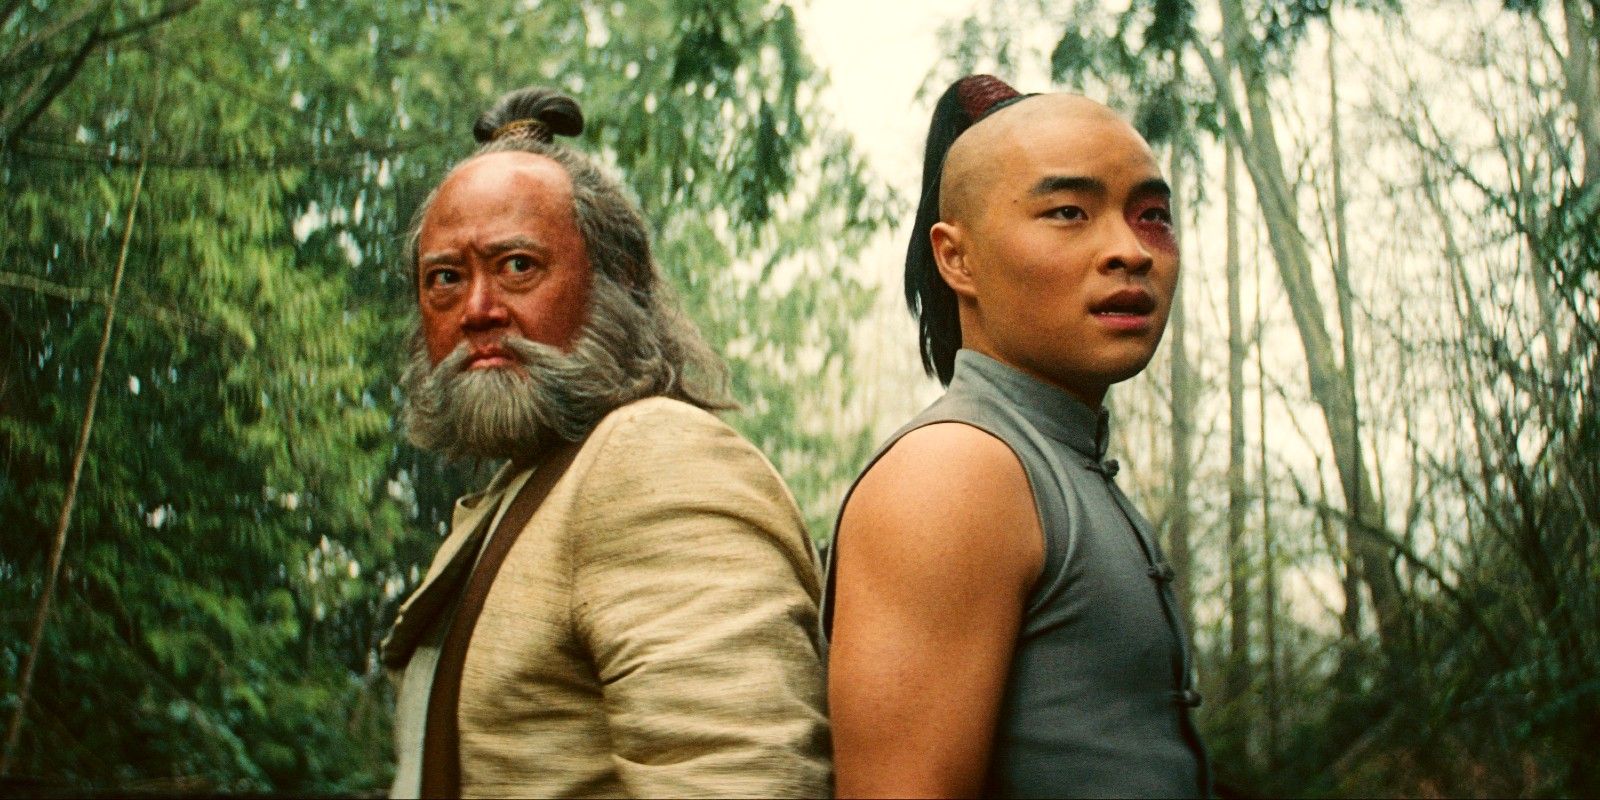 Netflix's Uncle Iroh and Zuko standing back to back in Avatar the Last Airbender